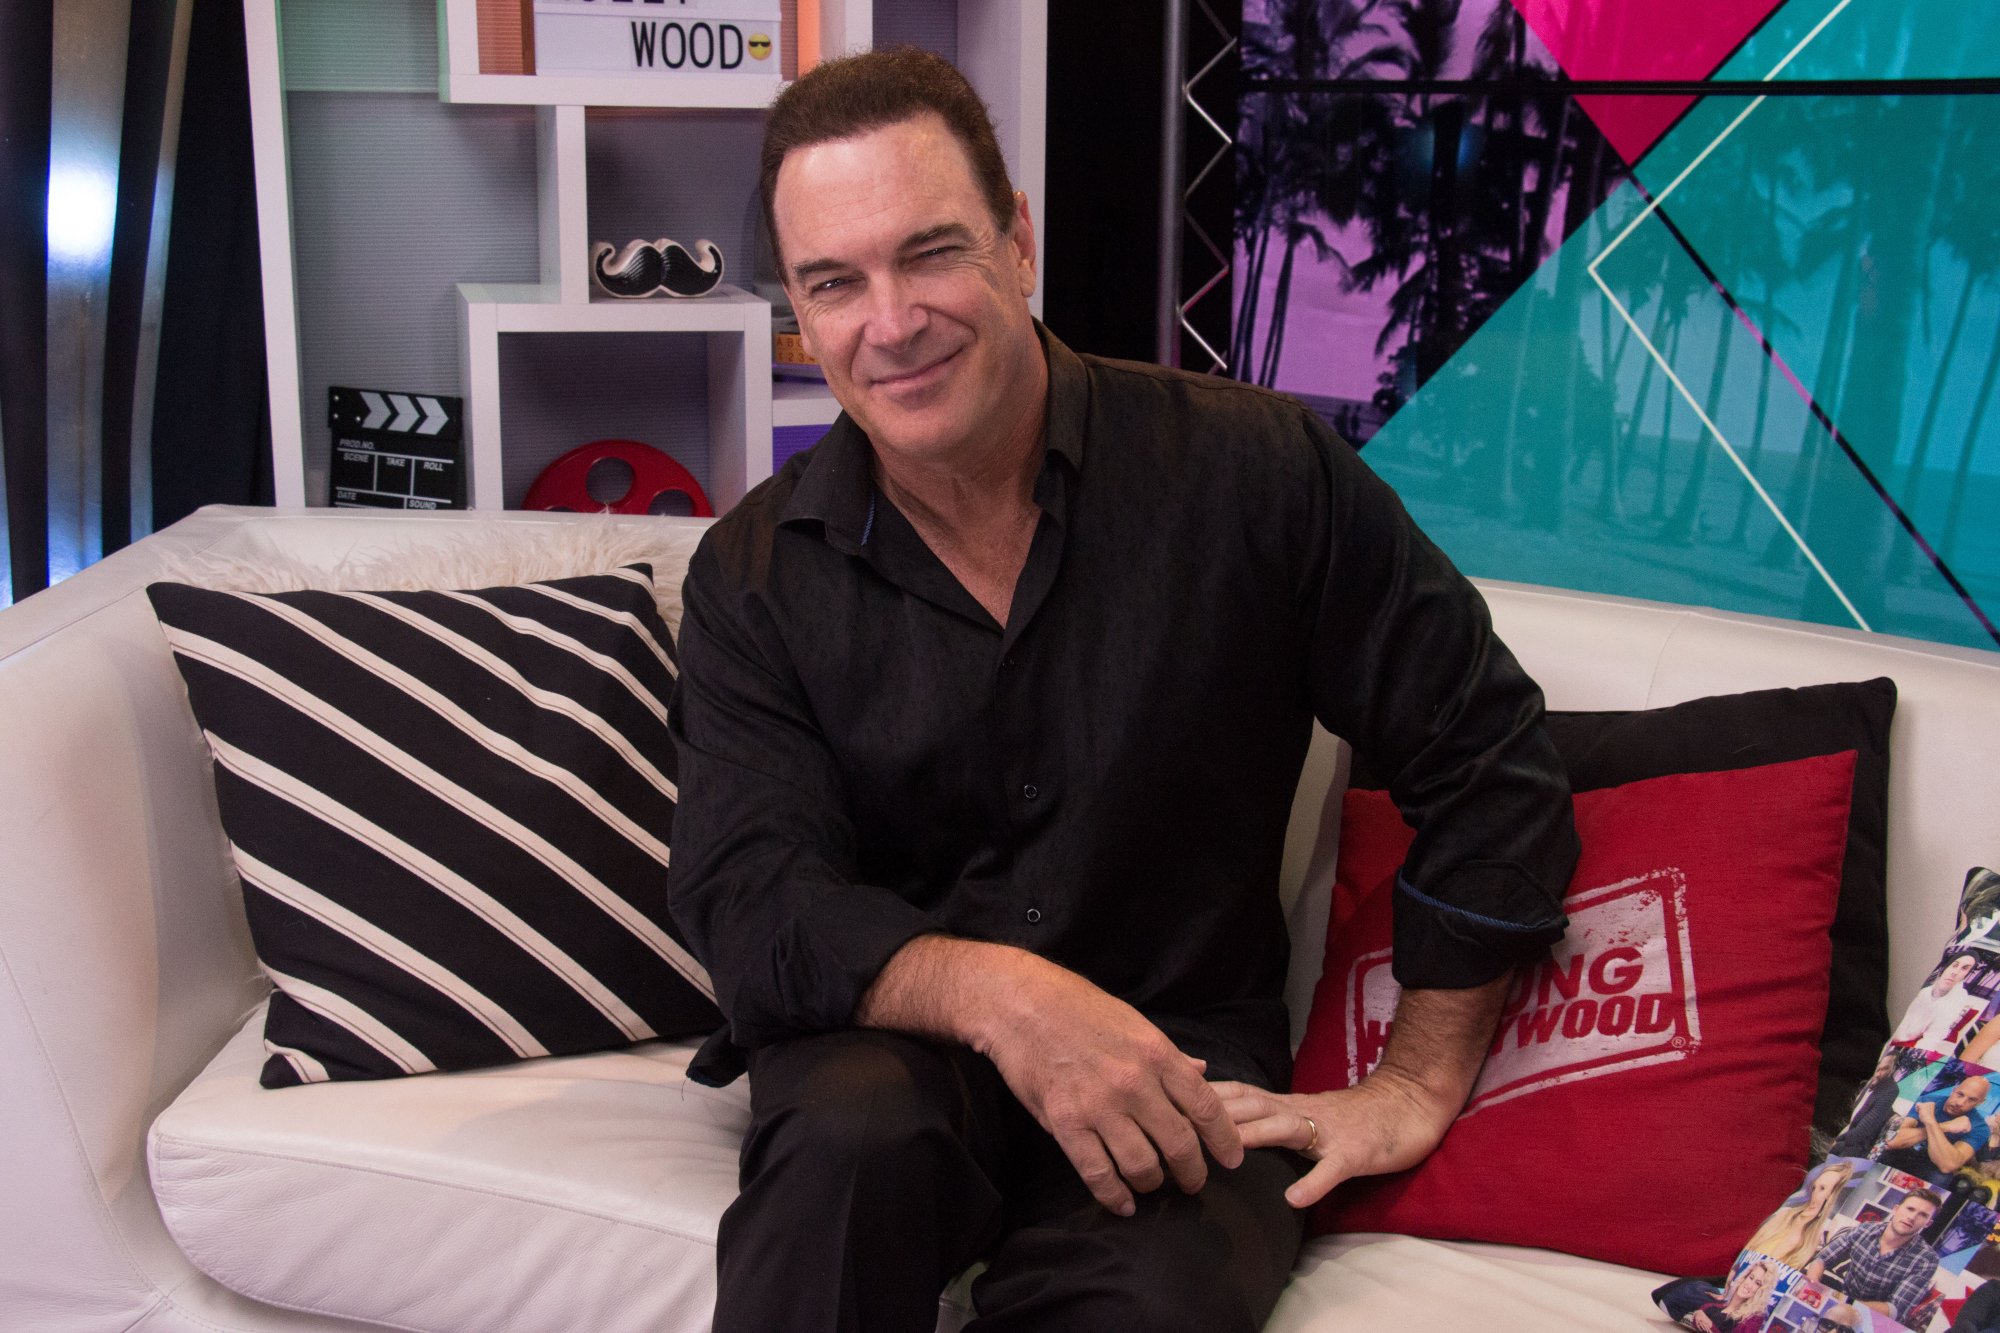 Patrick Warburton, who appeared during 'The Bachelorette' 2022. In the image, he's sitting on a white couch with pink and black pillows. He's wearing all black and smiling.